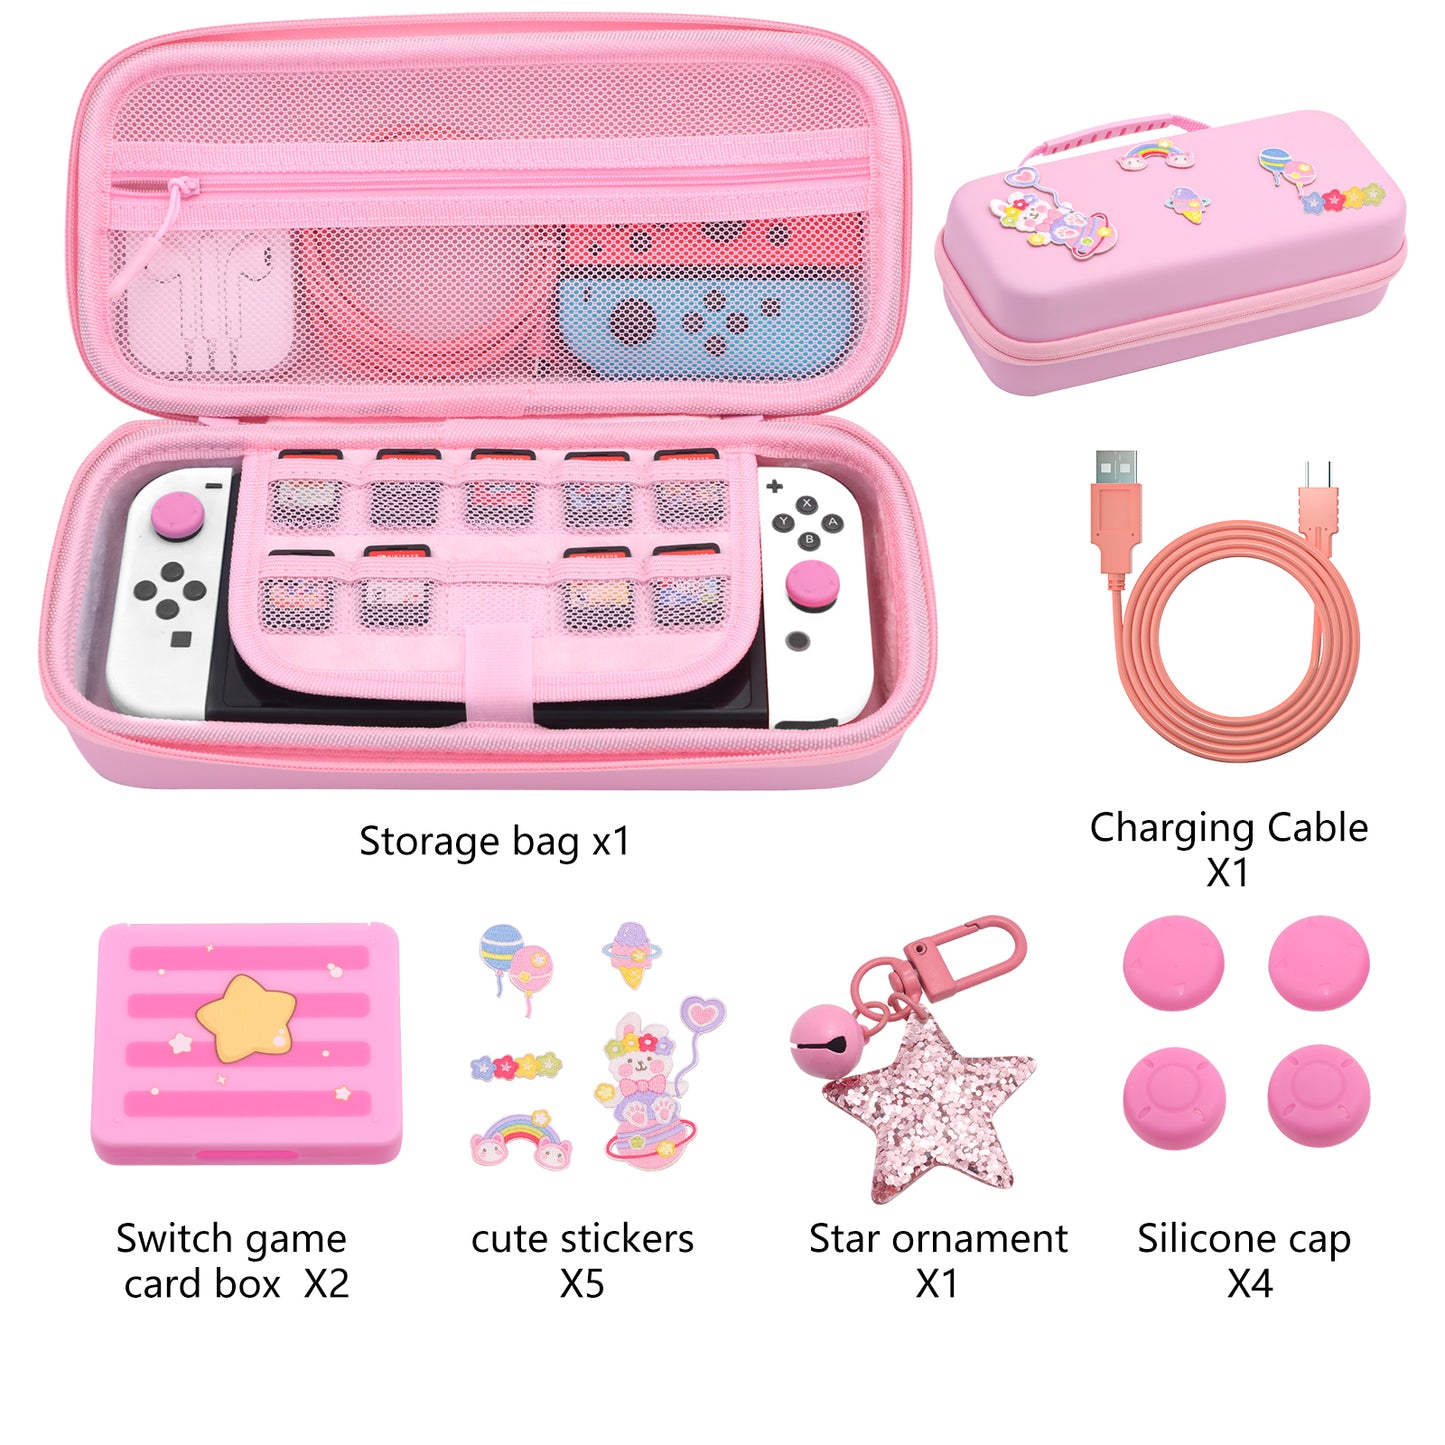 Nintendo switch oled pink accessories